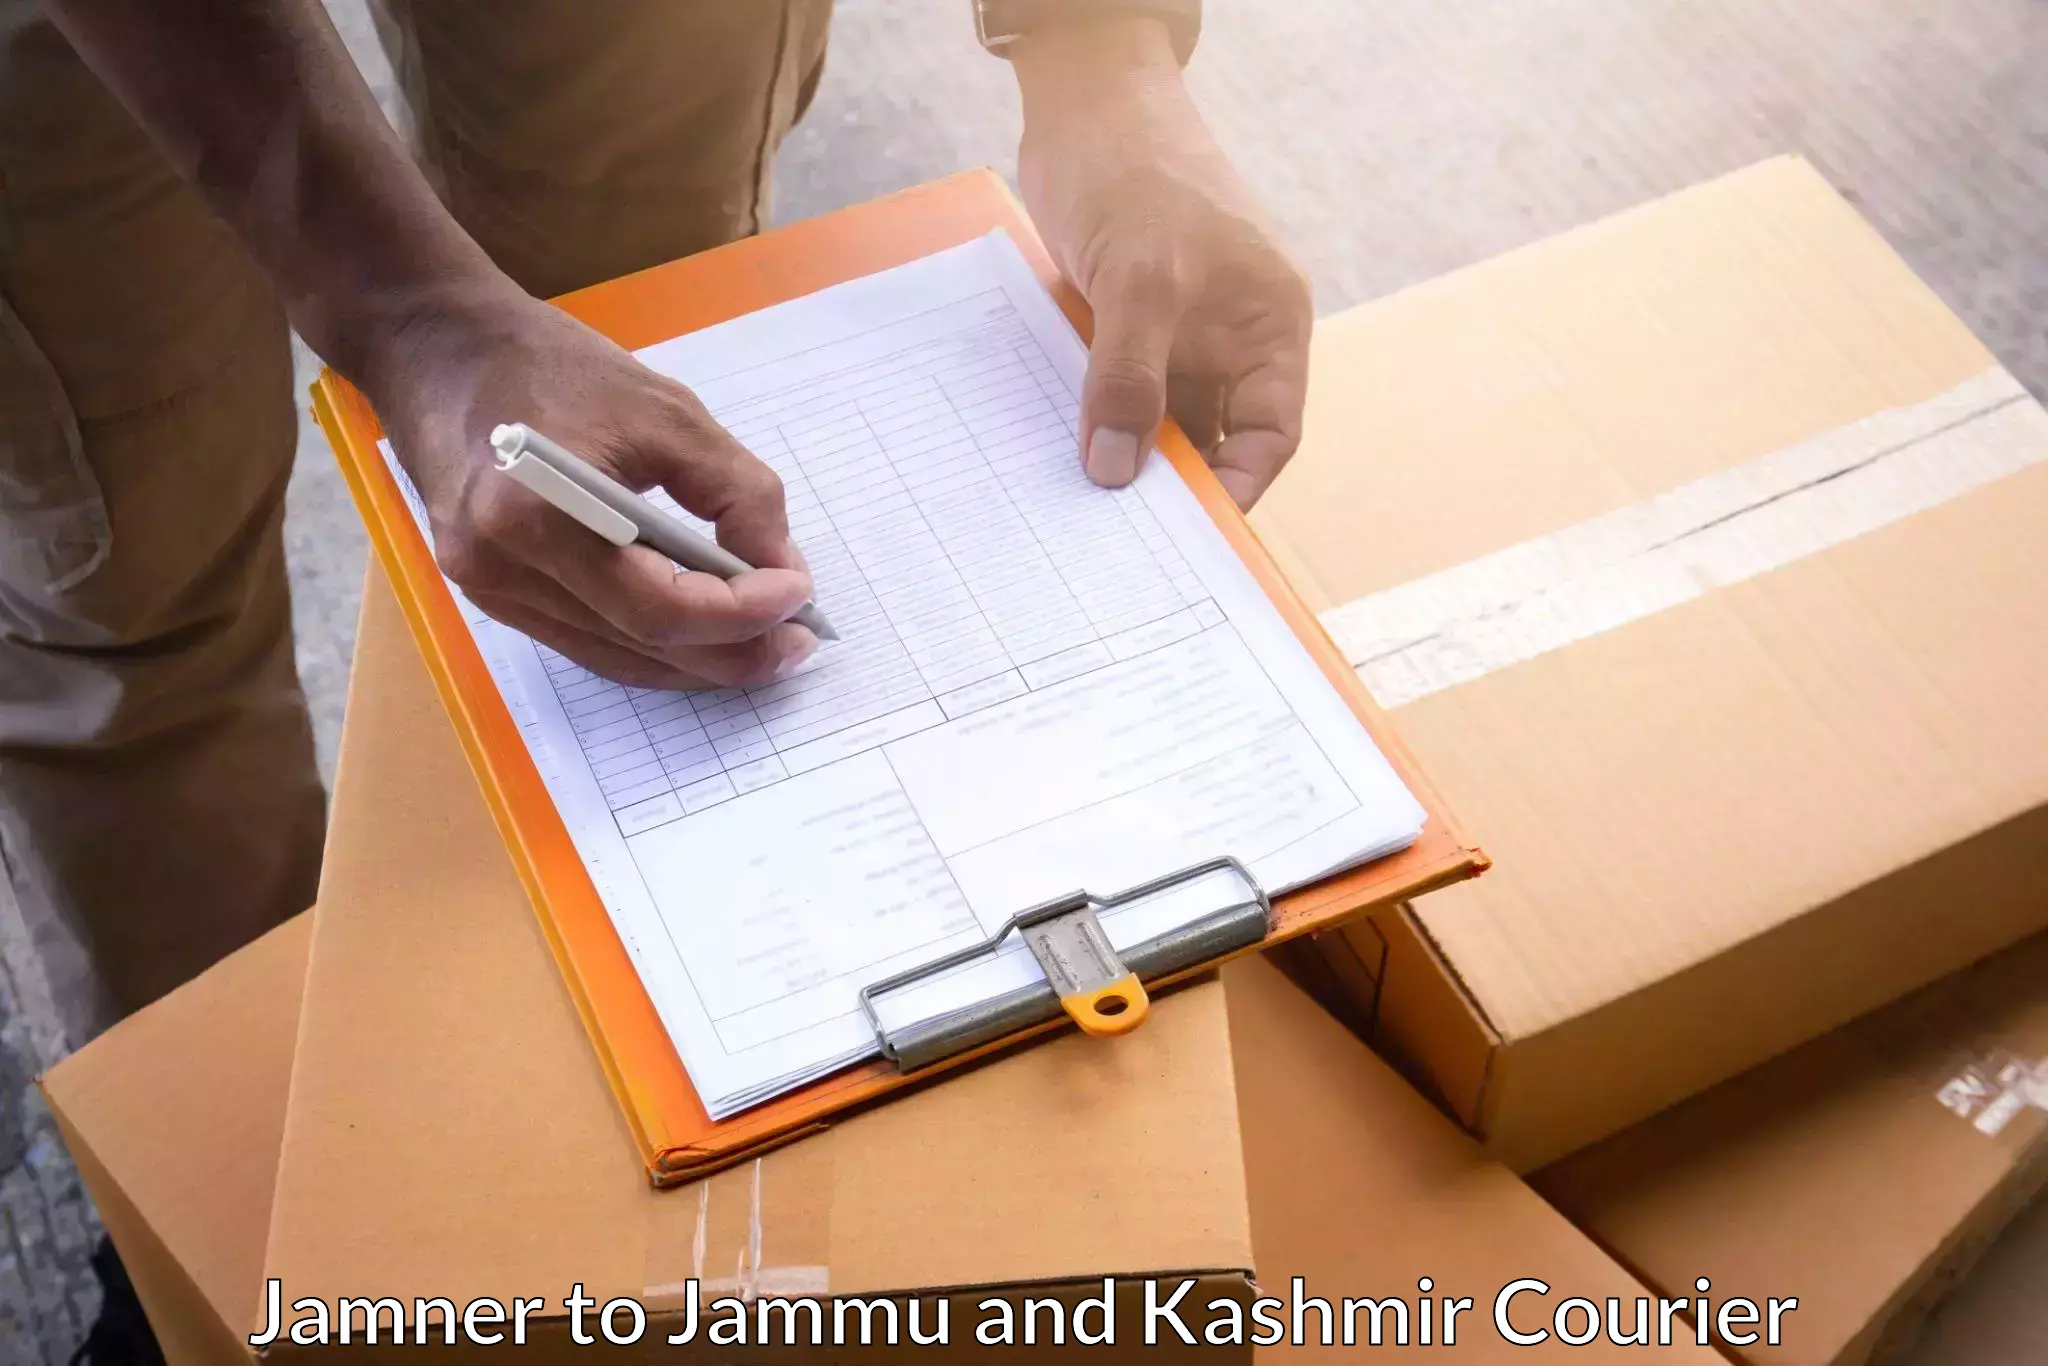 Next-day delivery options Jamner to Jammu